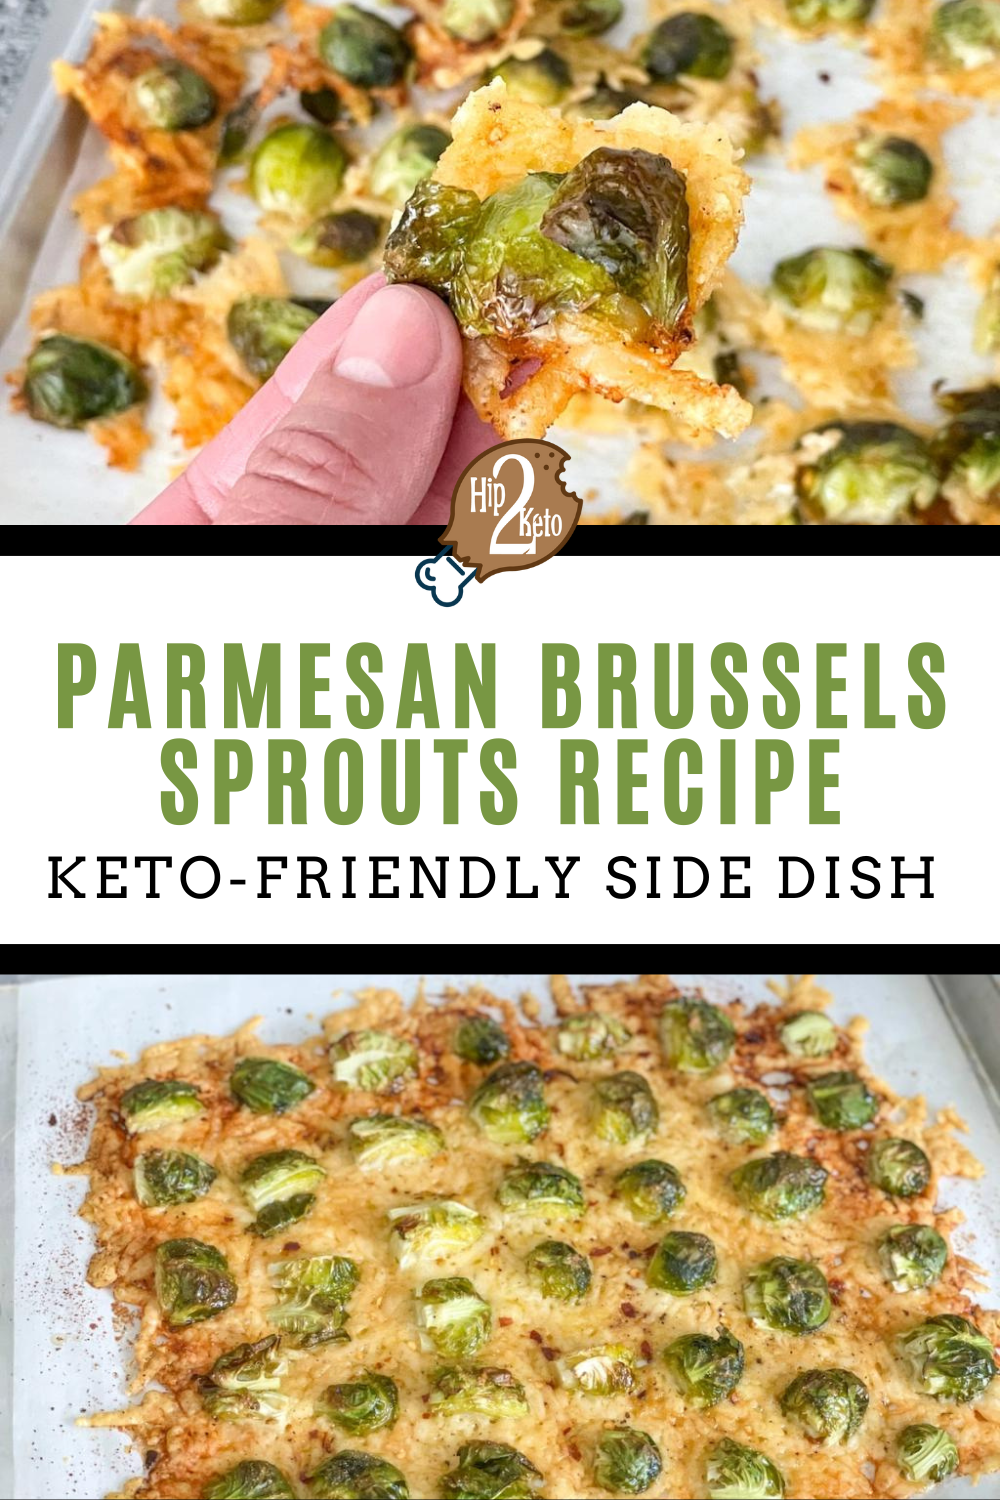 Parmesan Brussels Sprouts - Only Way to Eat Brussels Sprouts